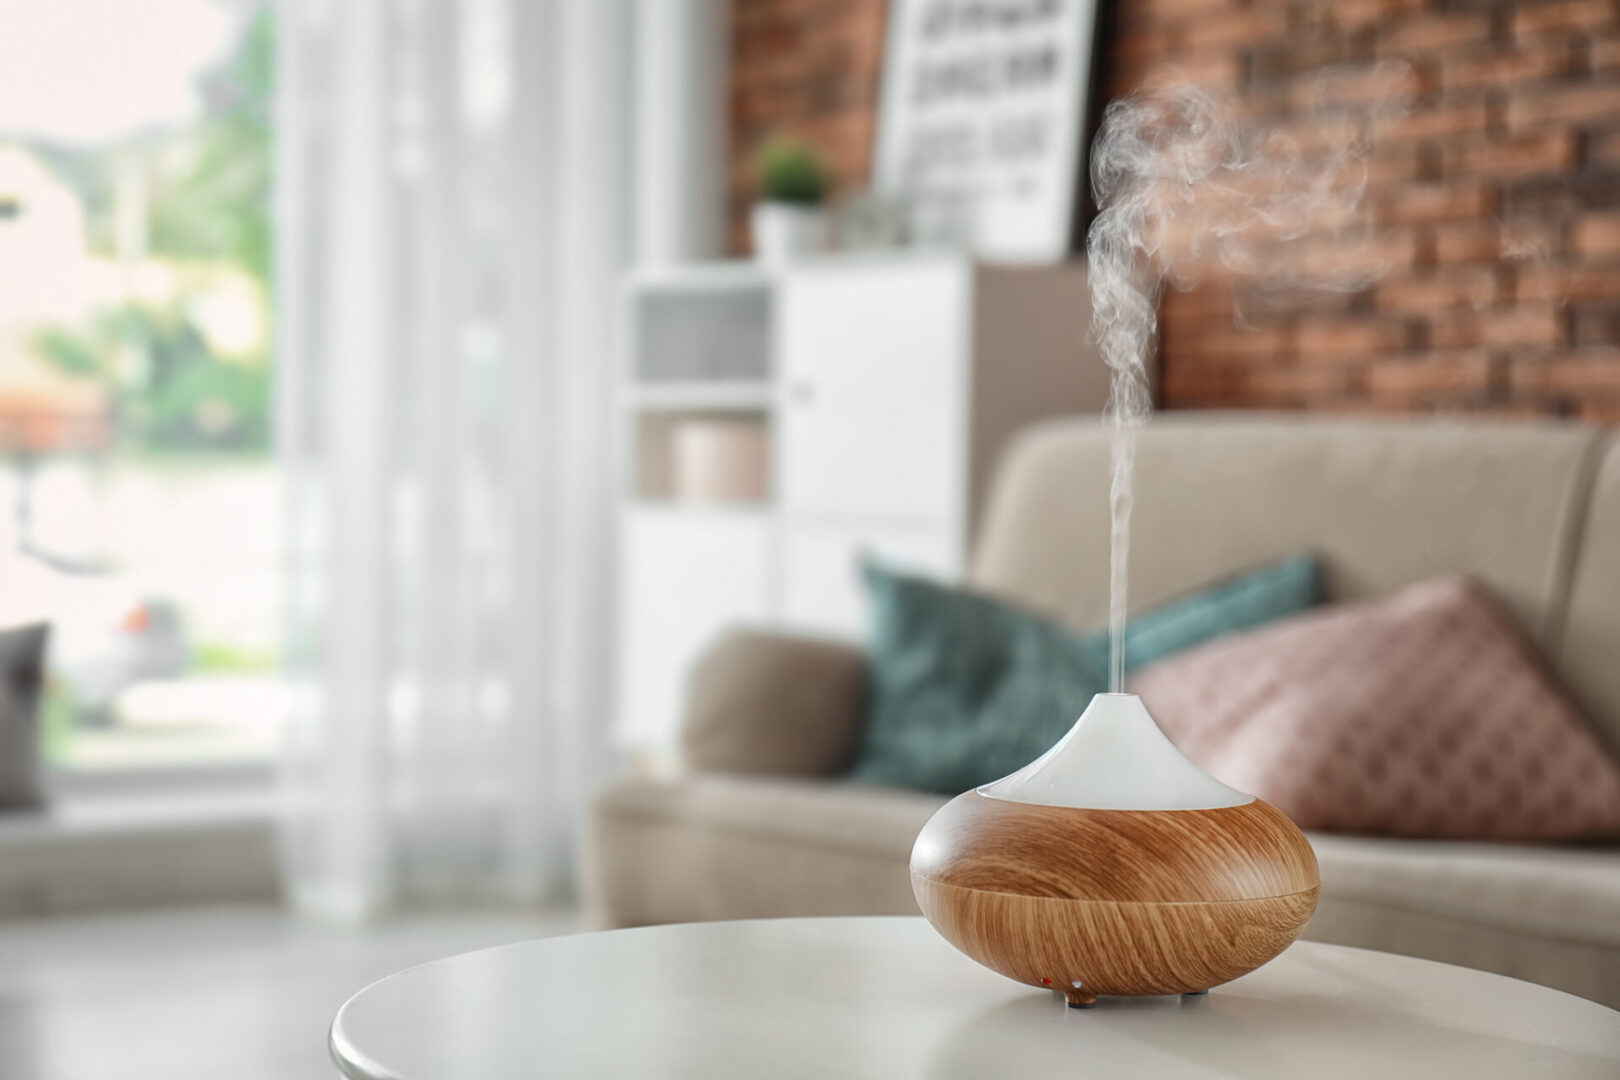 A diffuser on top of a table in the living room